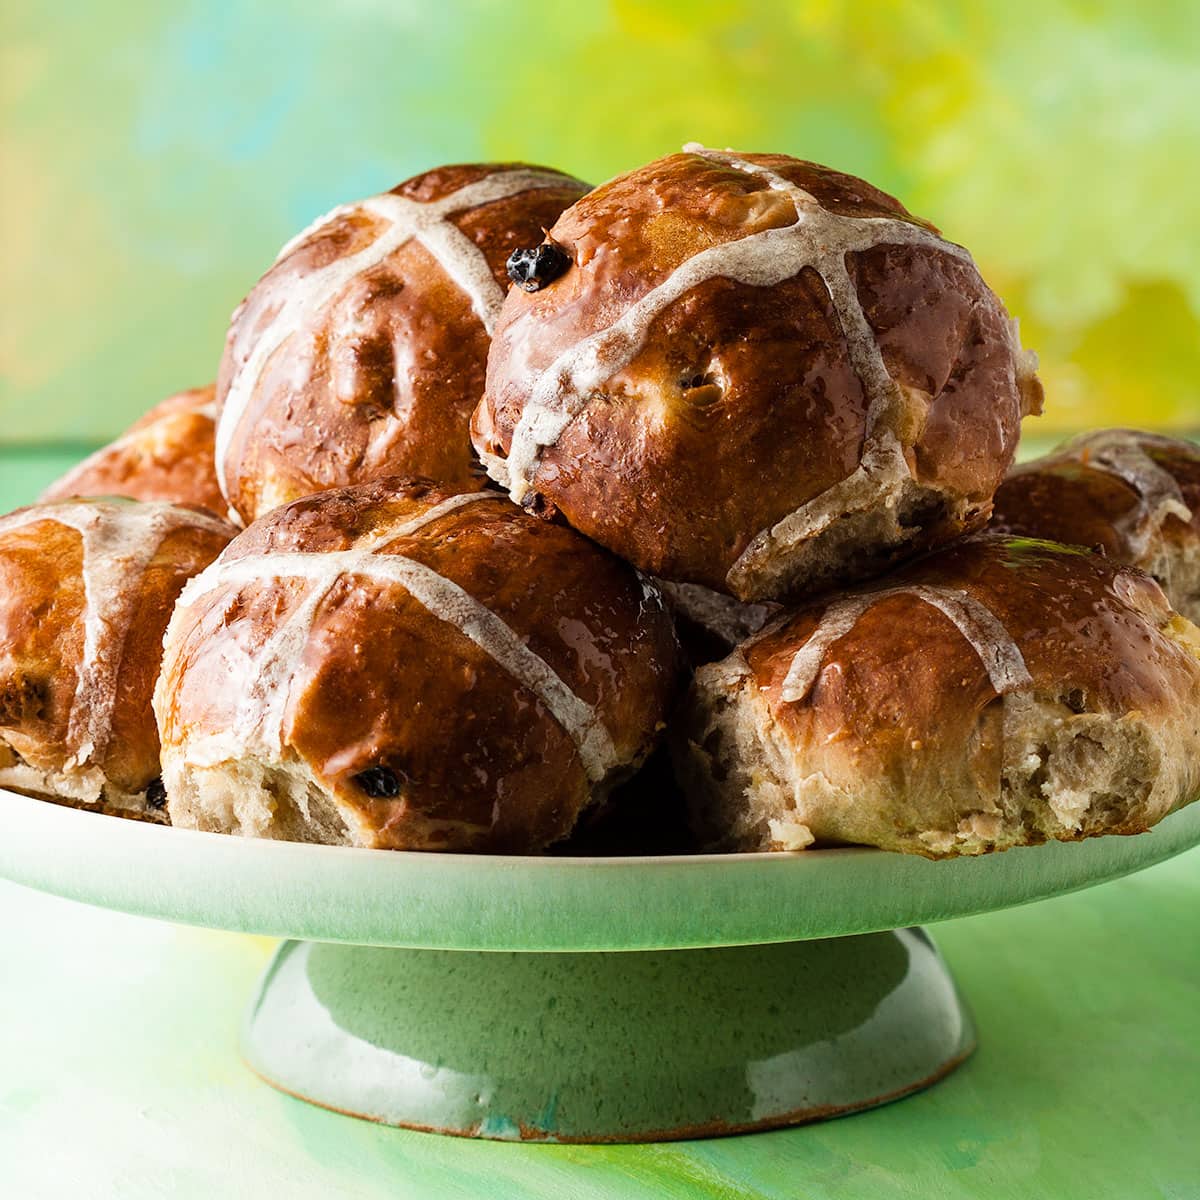 apple and sultana hot cross buns on a cake stand.